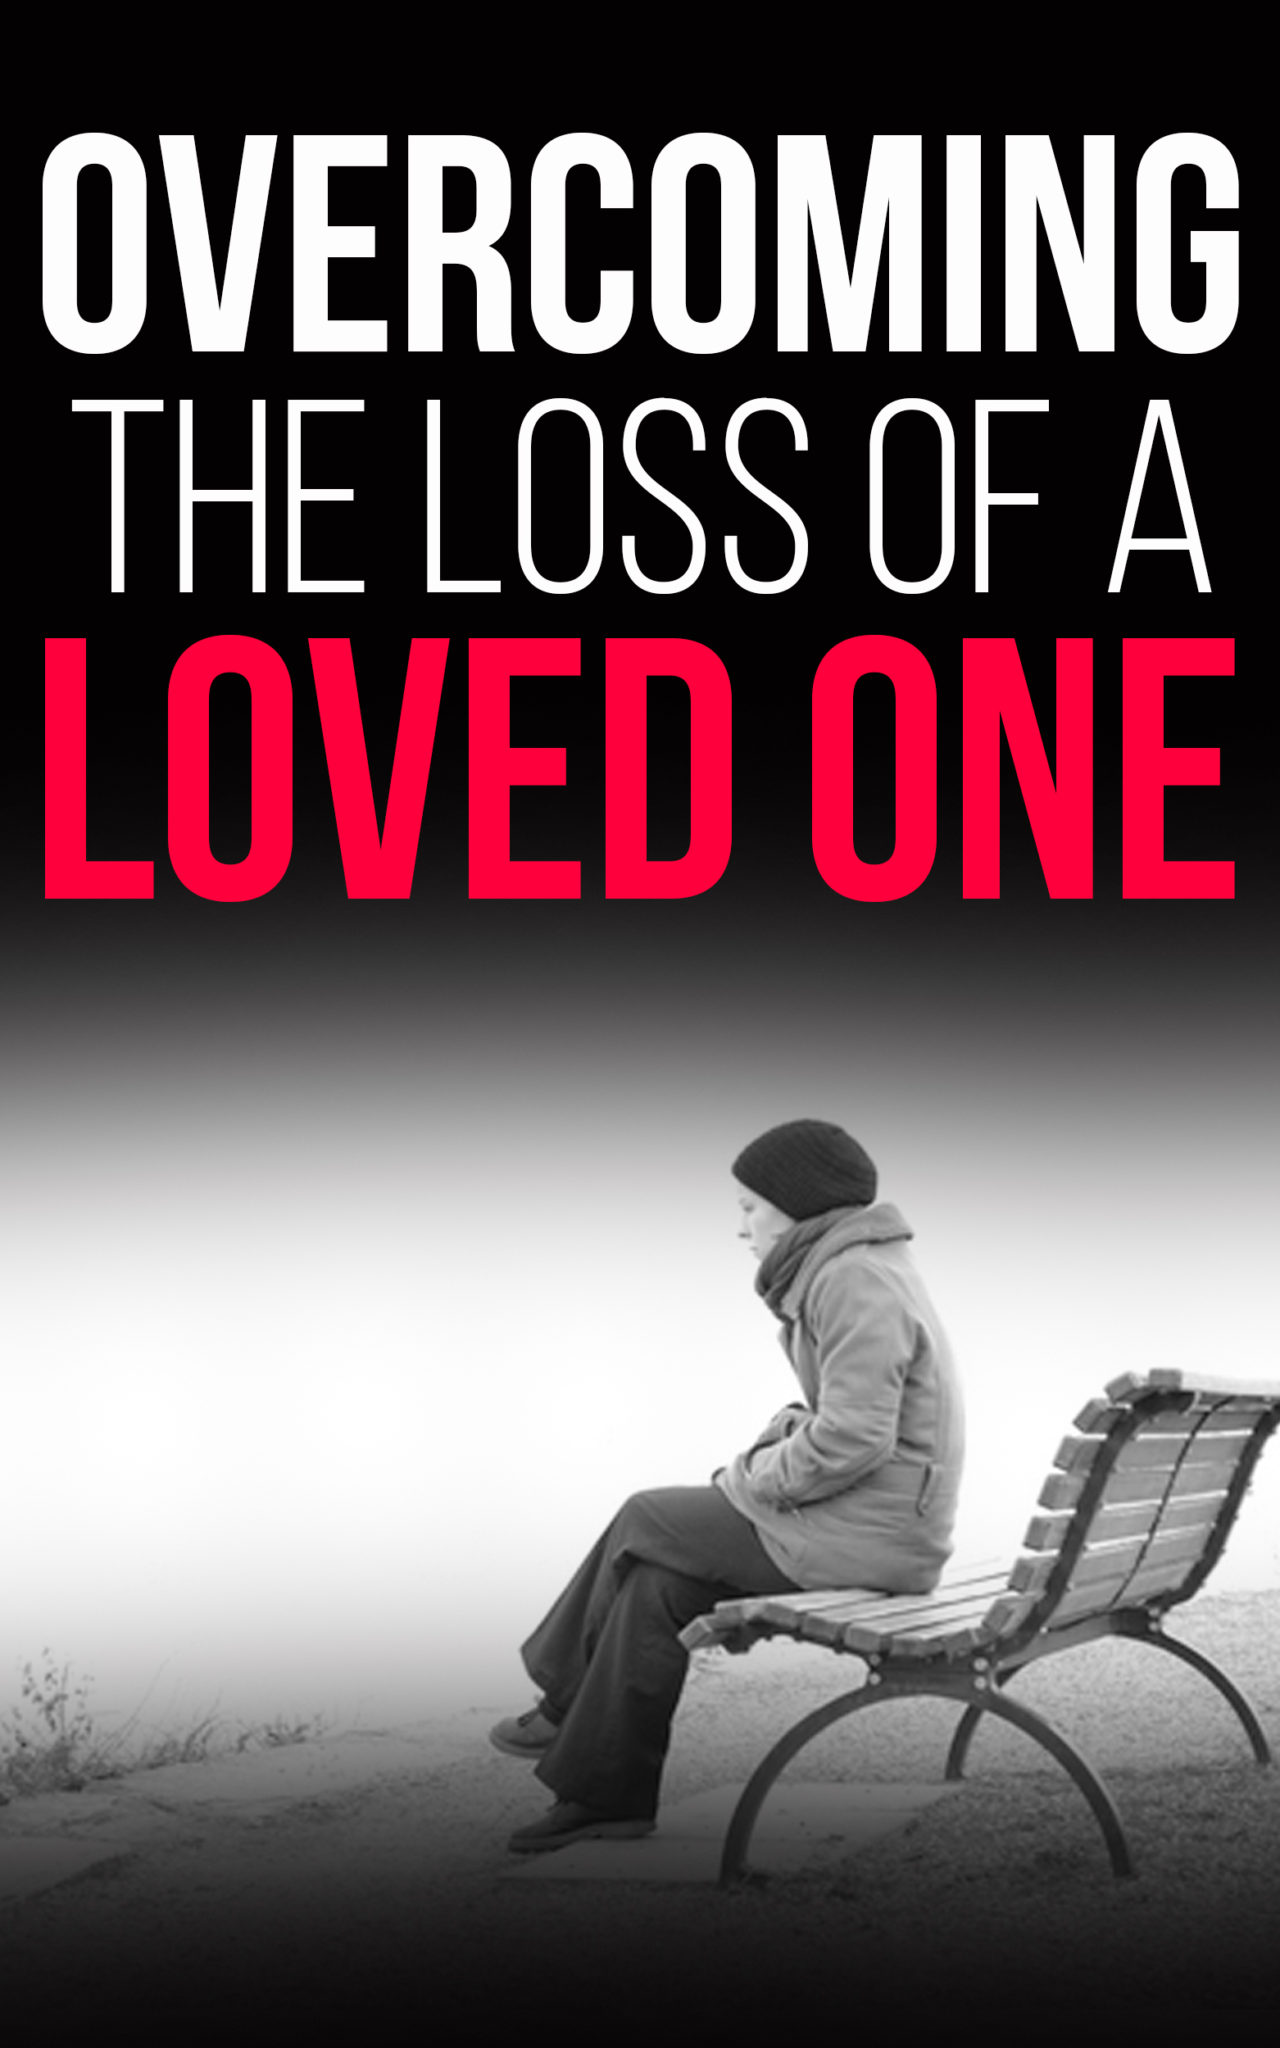 FREE: Overcoming the loss of a loved one by Justin Lenk